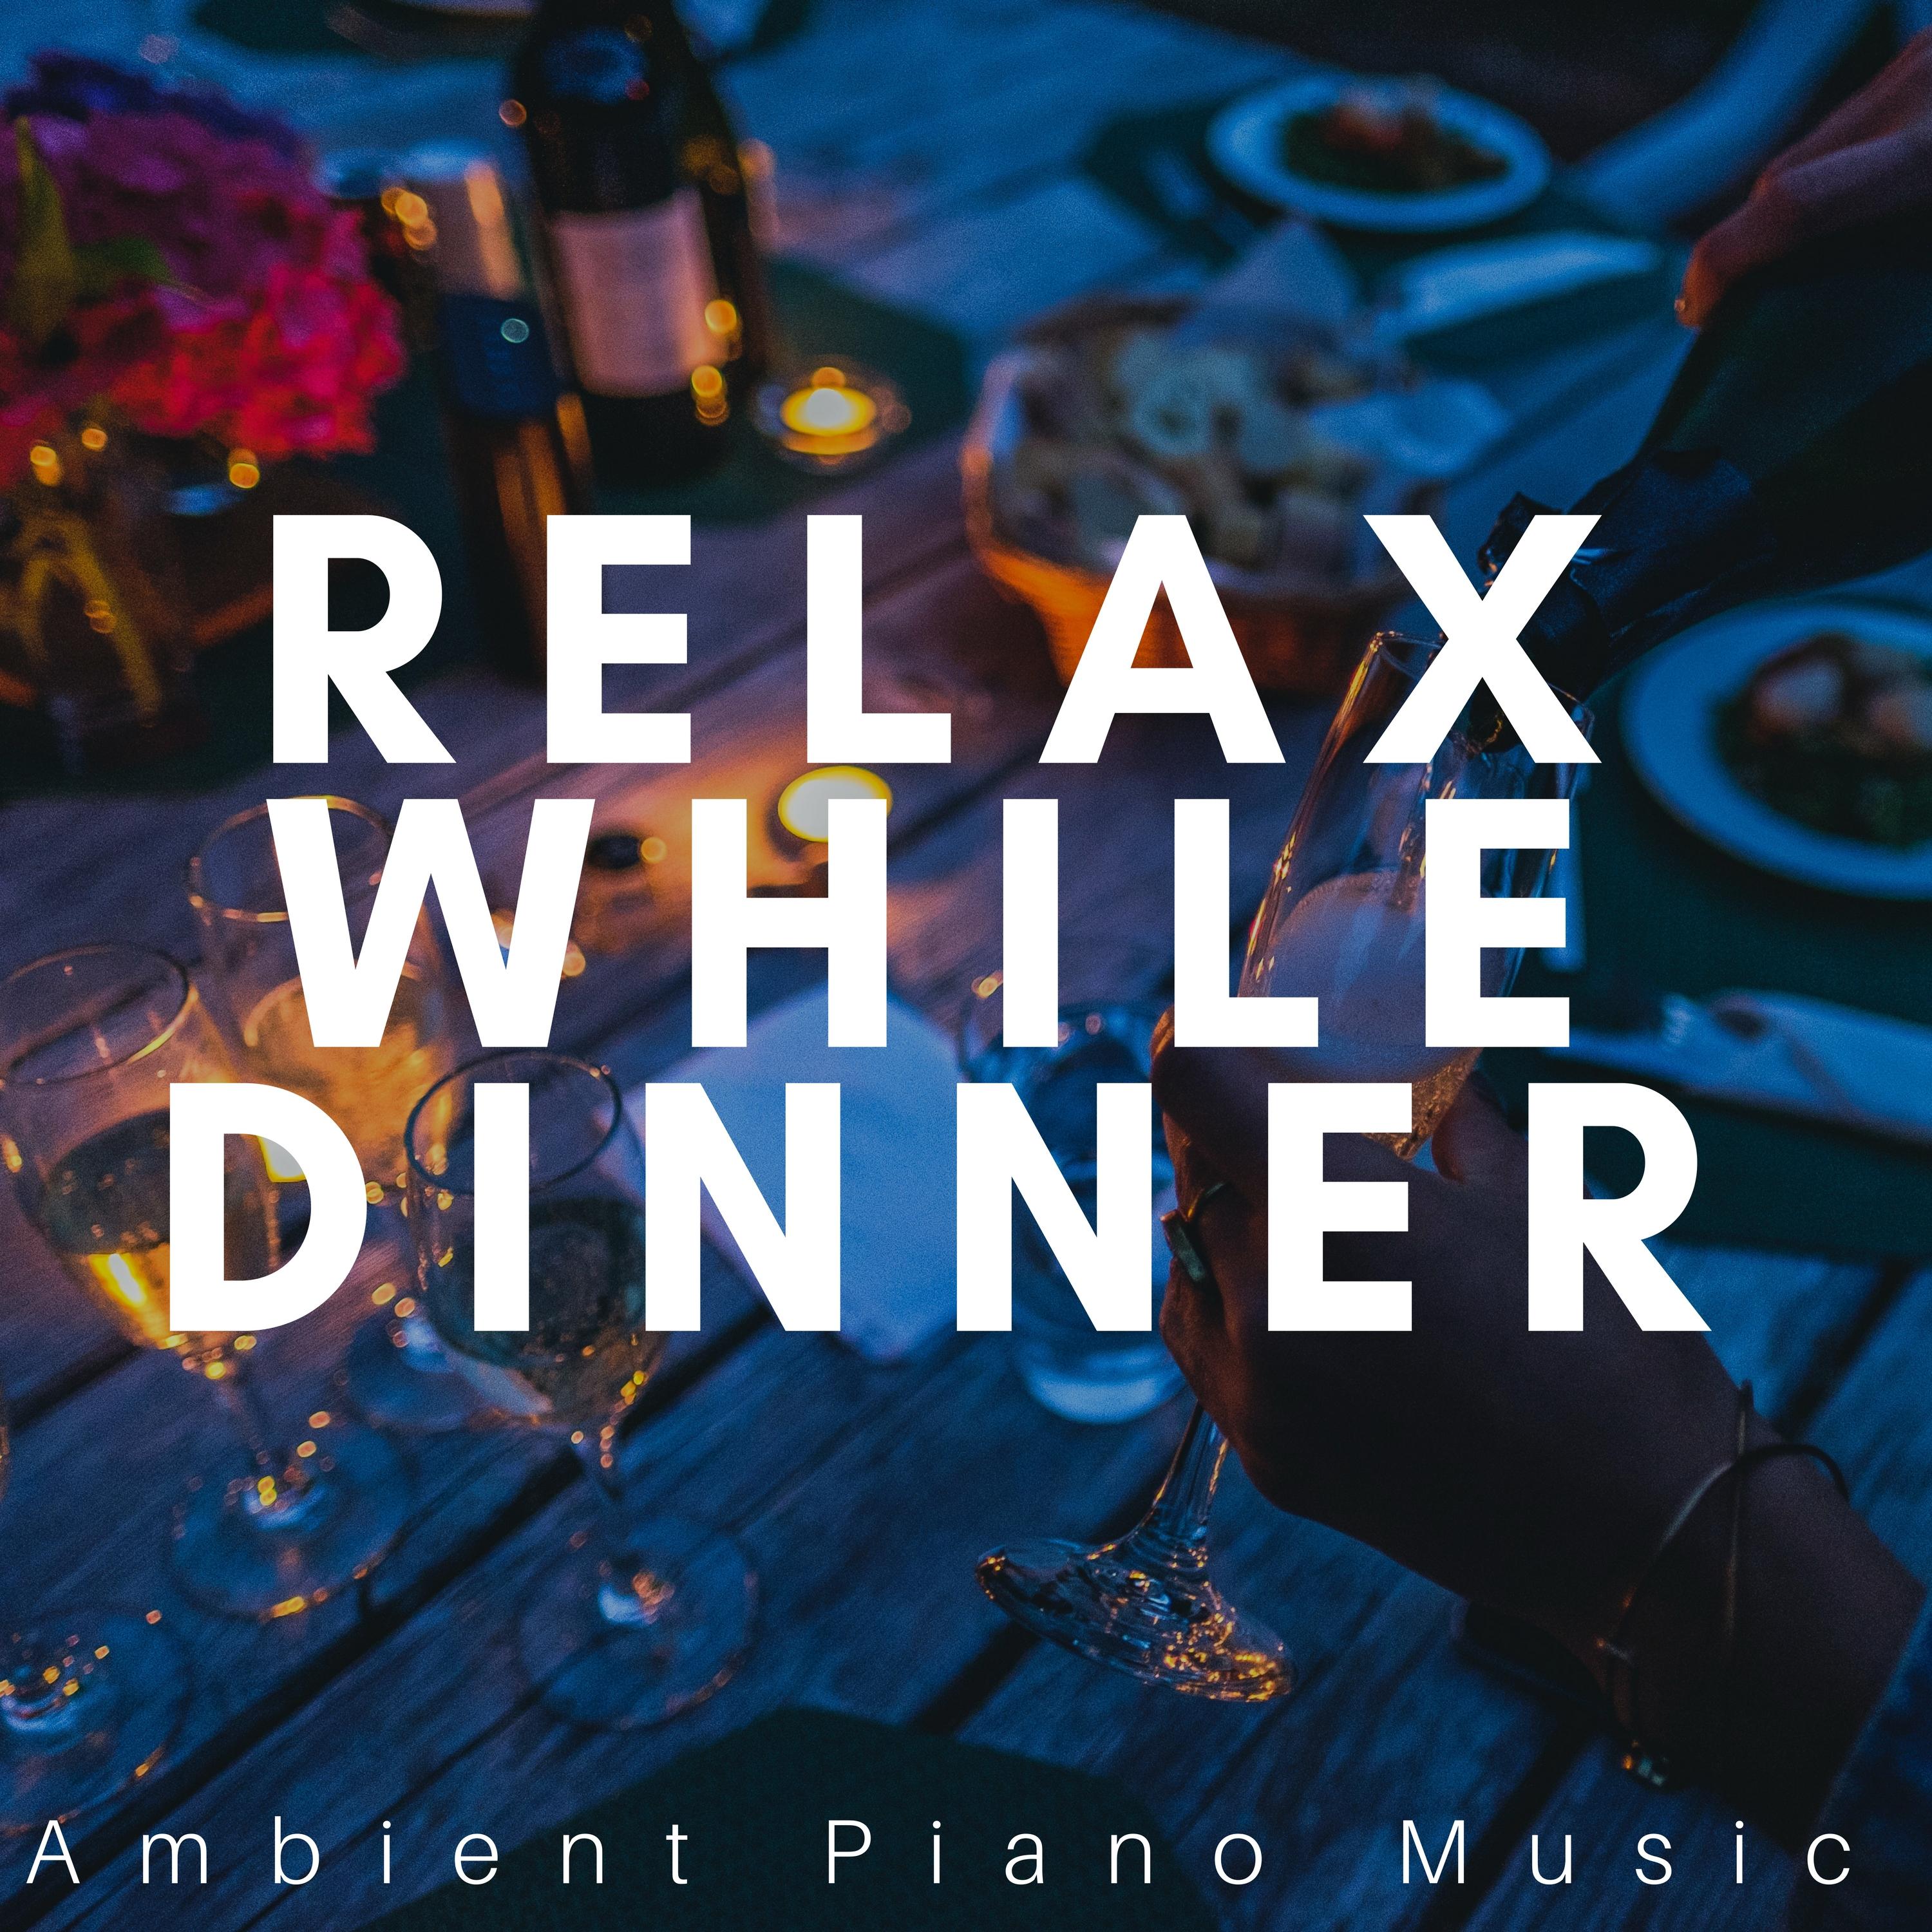 Relax While Dinner: Ambient Piano Music for a Perfect Evening Mood